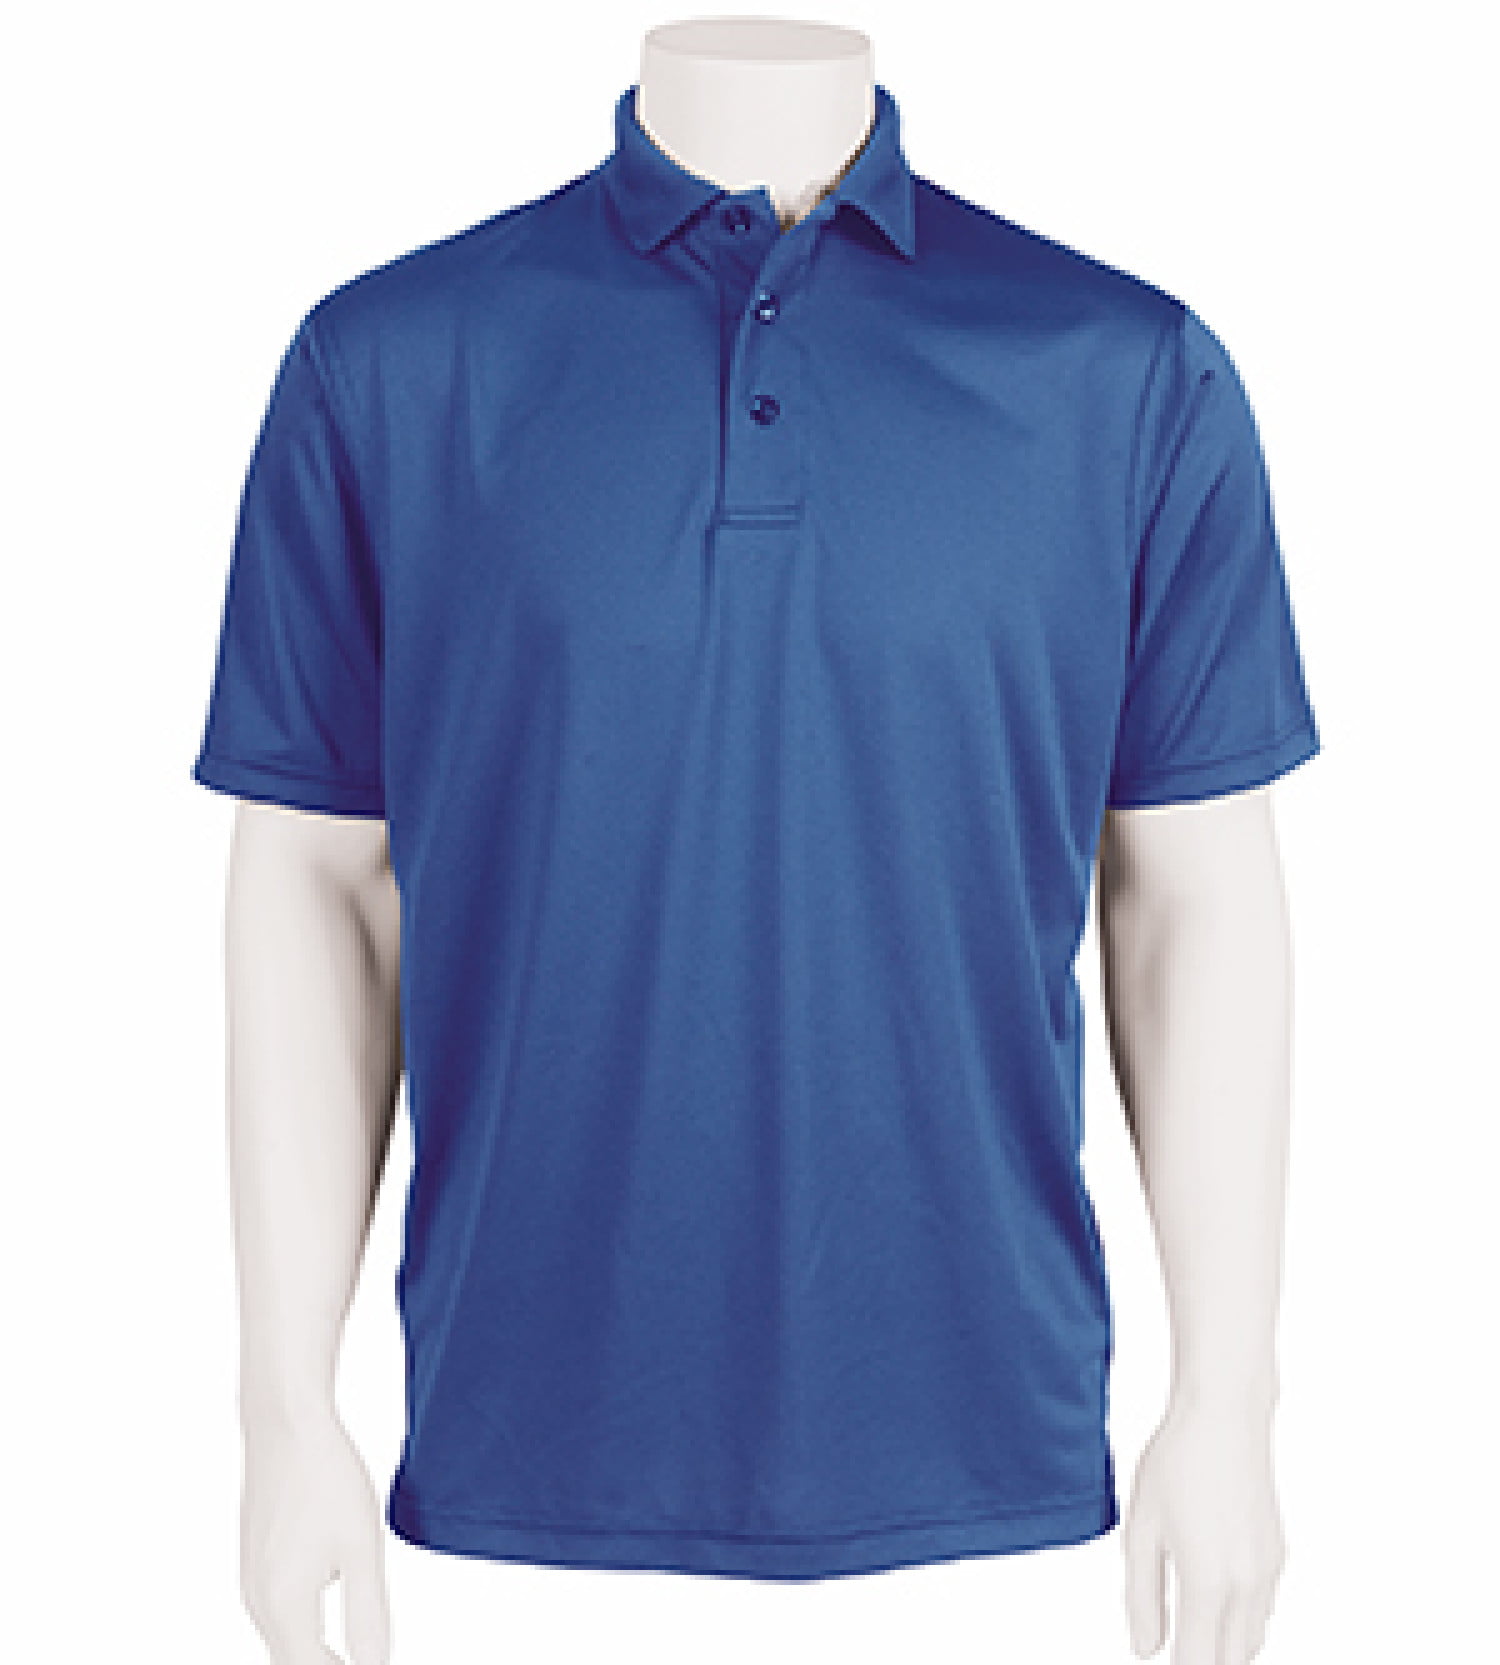 Paragon Products - Paragon Men's Guardian Snag Proof Polo 4001 ...